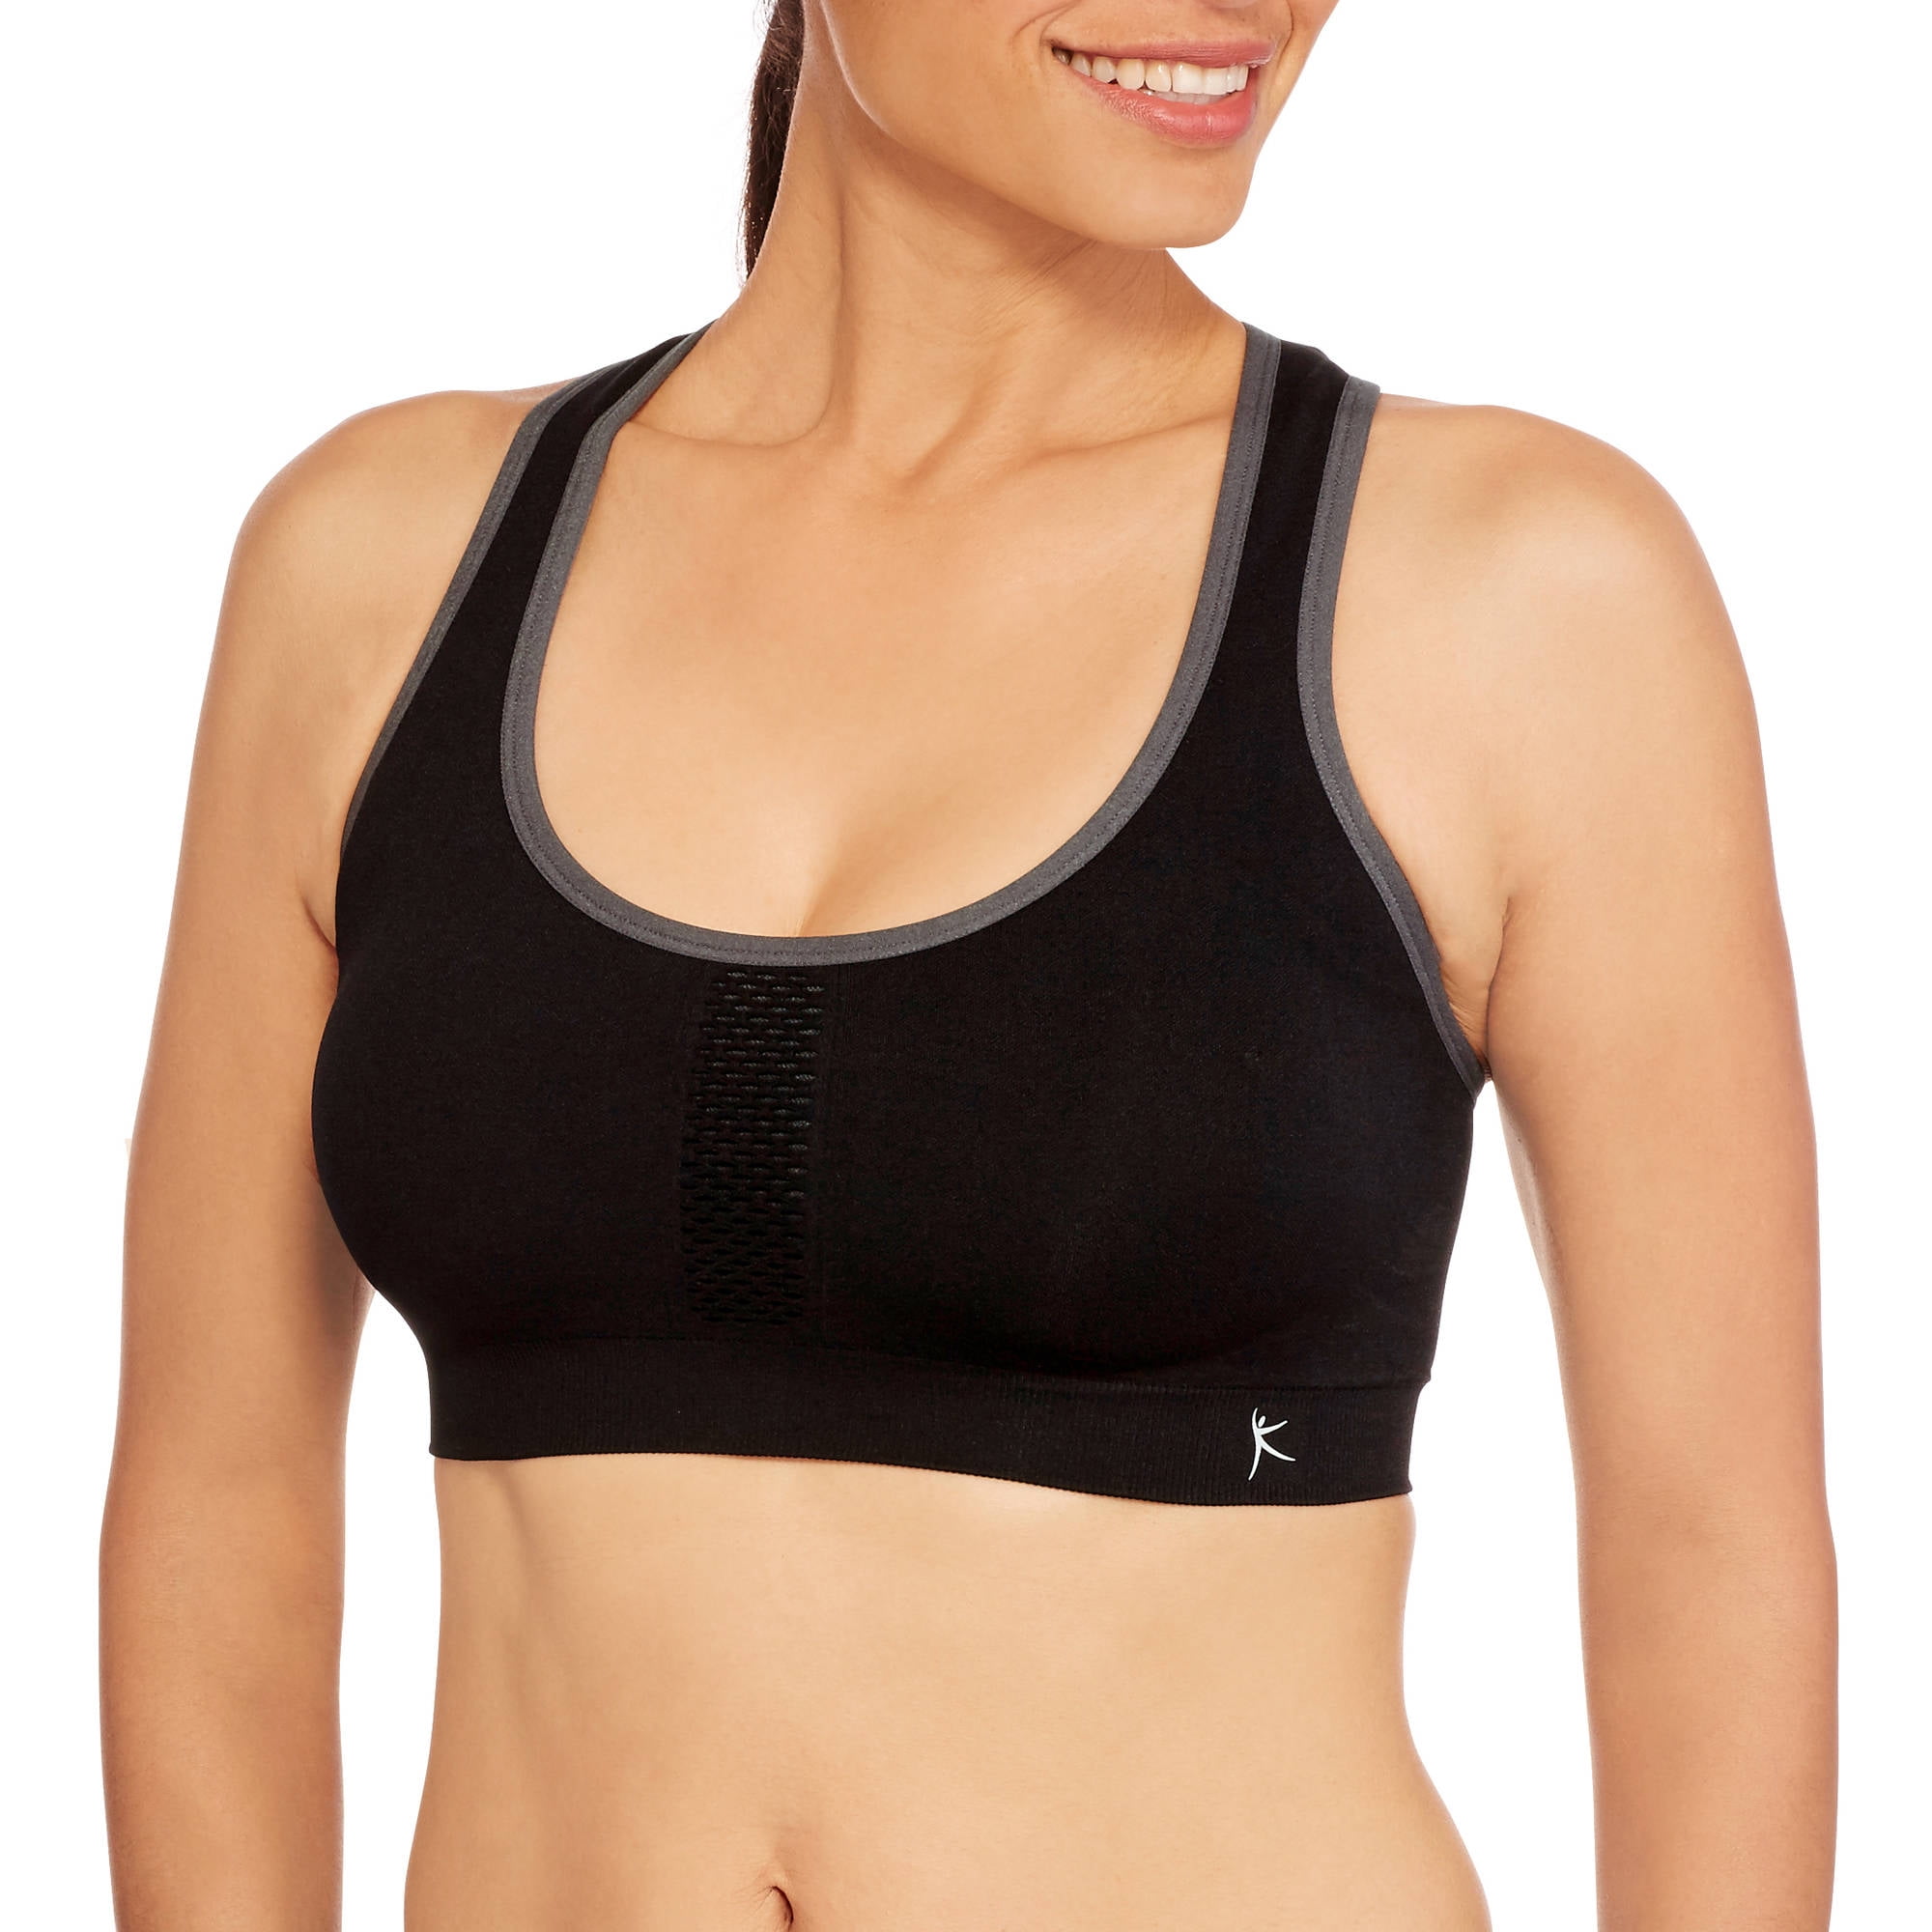 Danskin Now Molded Cup Seamless Sports Yoga Workout Athletic Bra XX-Large 2XL 